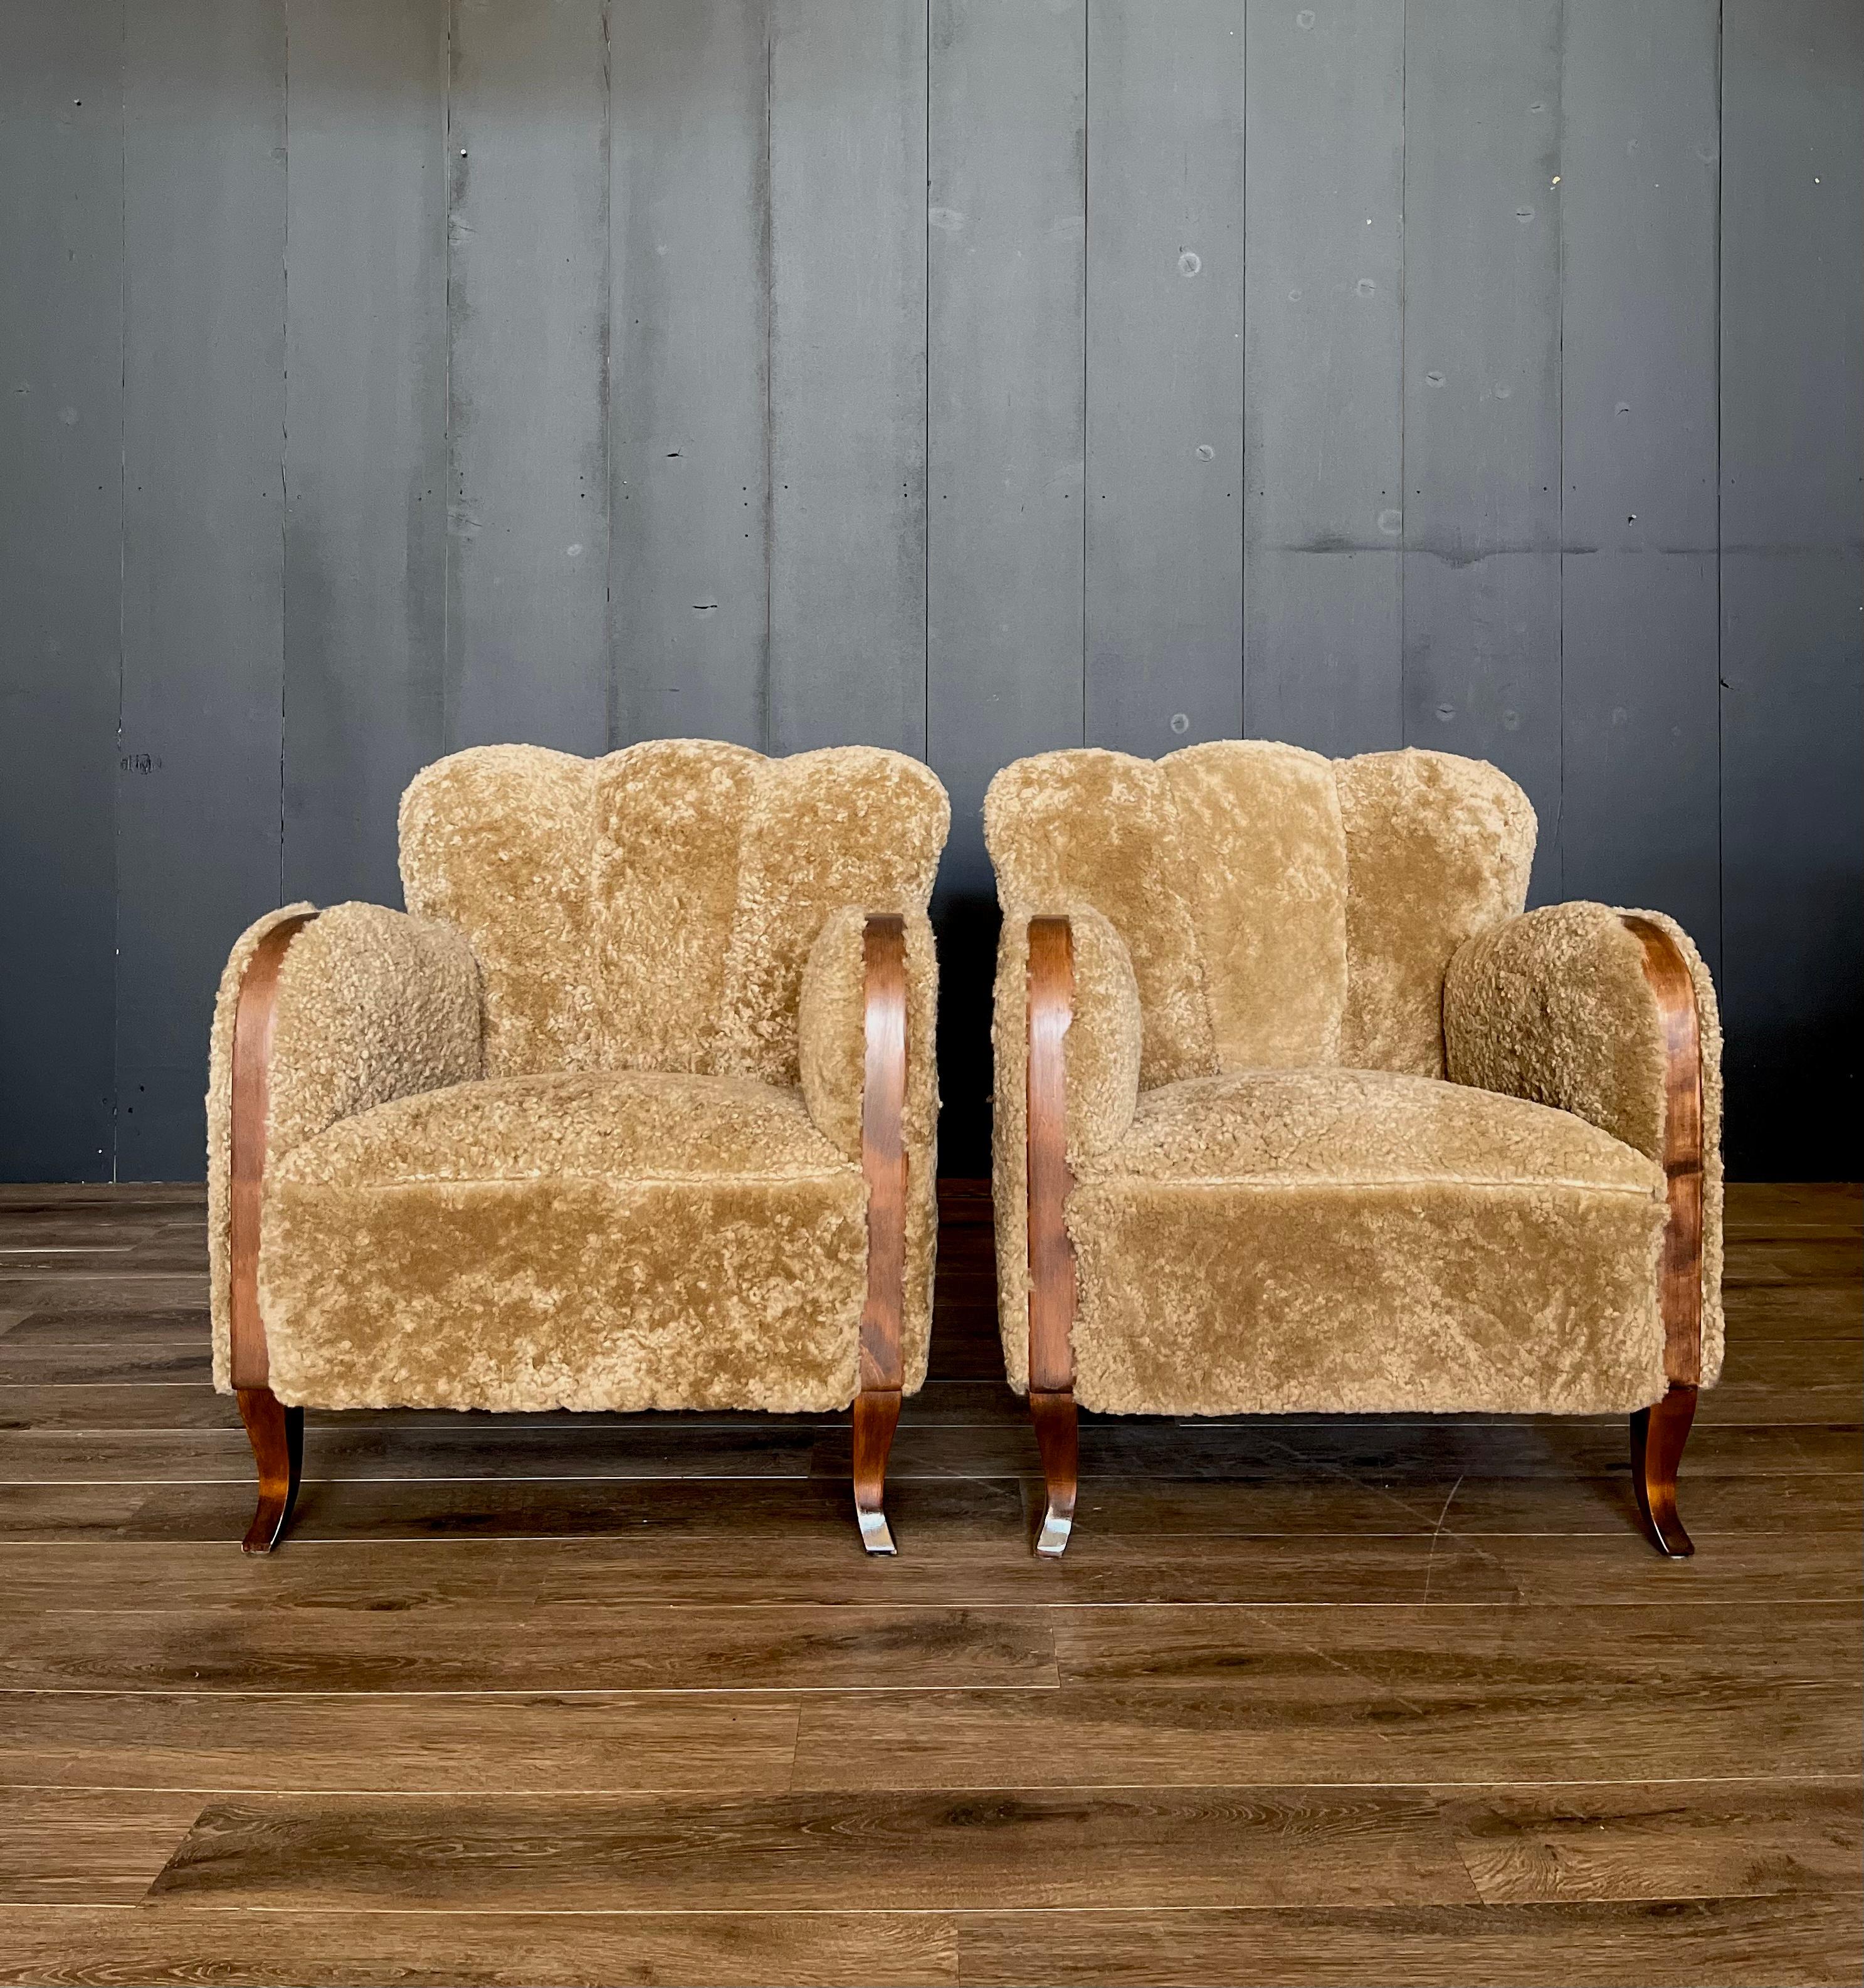 Step into the timeless allure of vintage elegance with this exquisite pair of Vintage Scandinavian Sheepskin Art Deco chairs. These stunning chairs epitomize the opulence and sophistication of the Art Deco era while exuding the warmth and comfort of